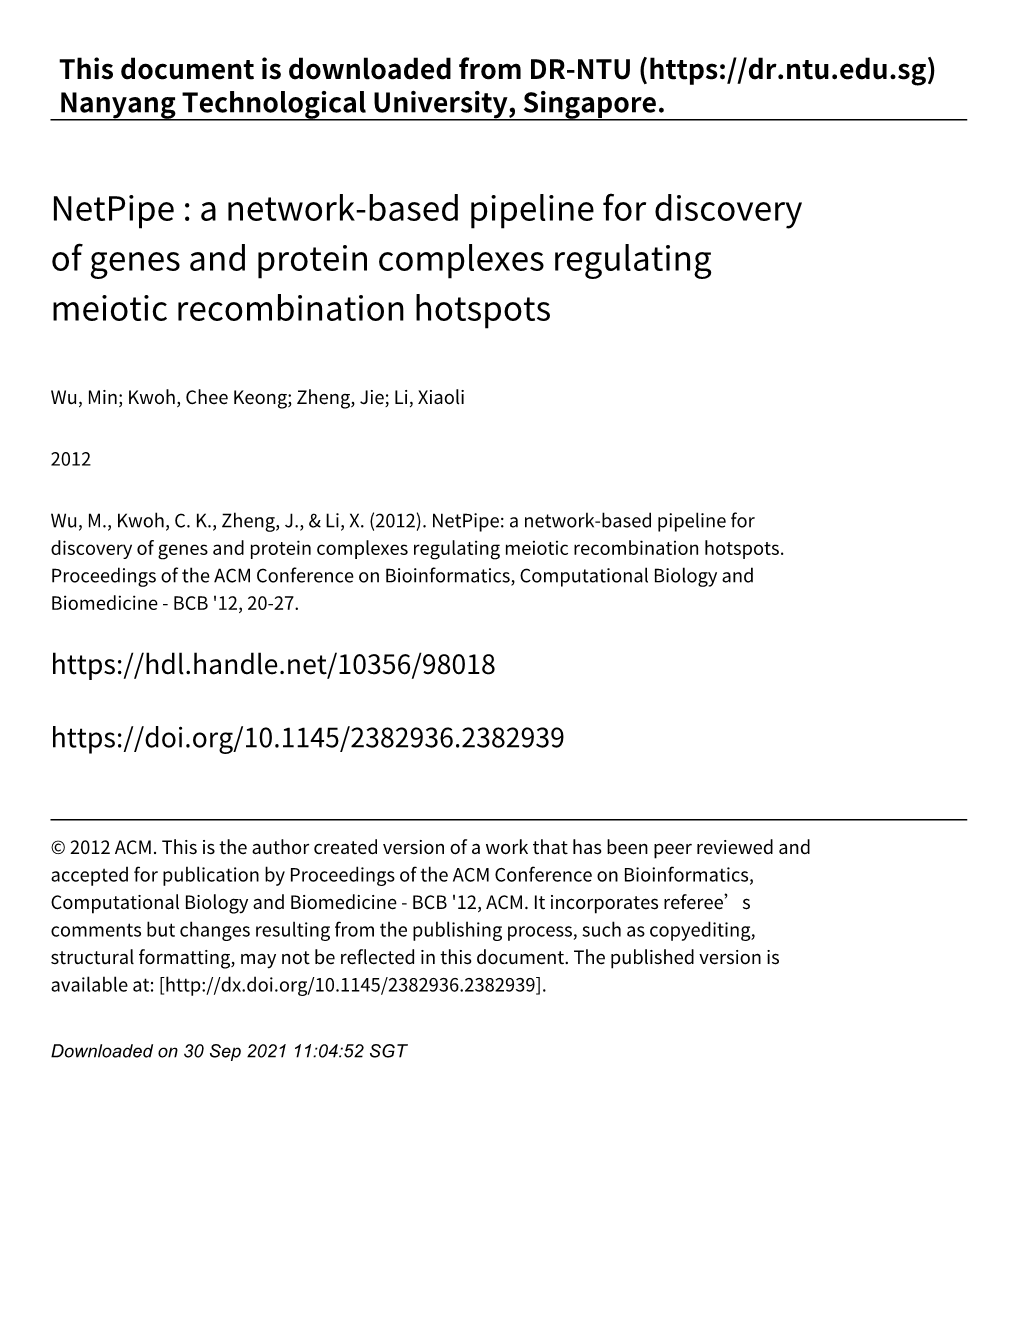 Netpipe : a Network‑Based Pipeline for Discovery of Genes and Protein Complexes Regulating Meiotic Recombination Hotspots